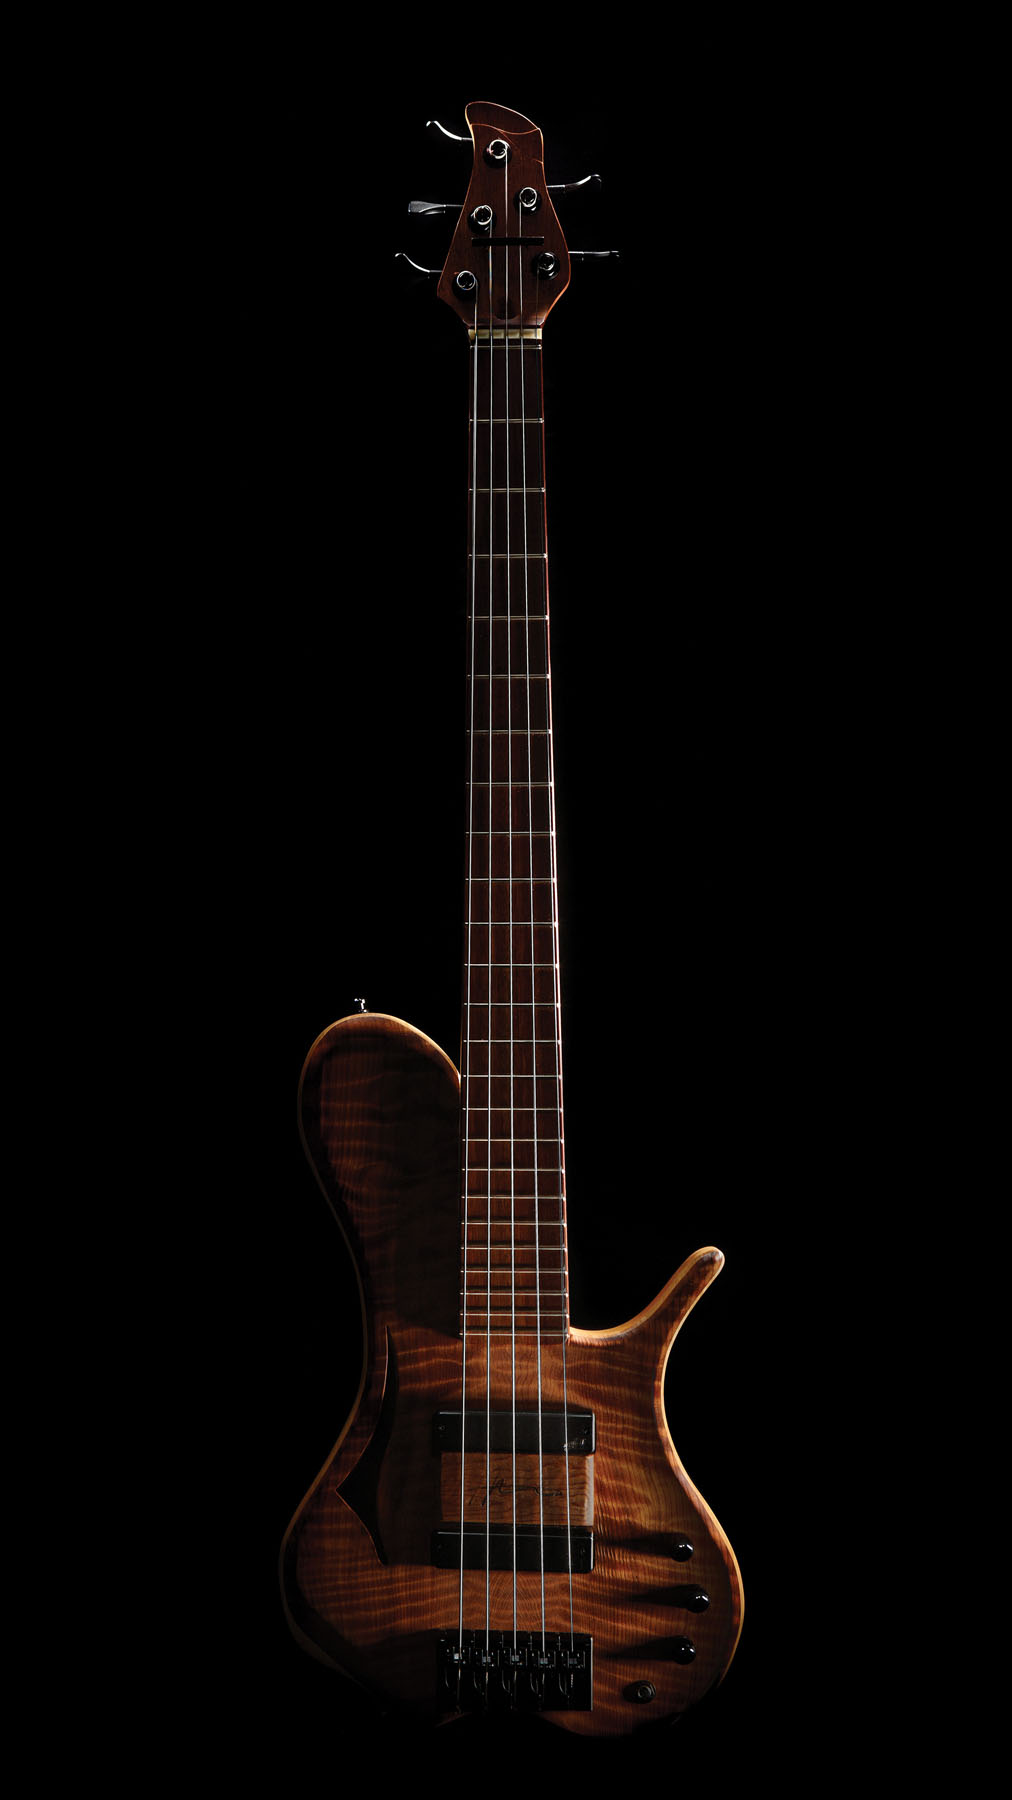 A bass guitar with stripe patterned wood on a black background